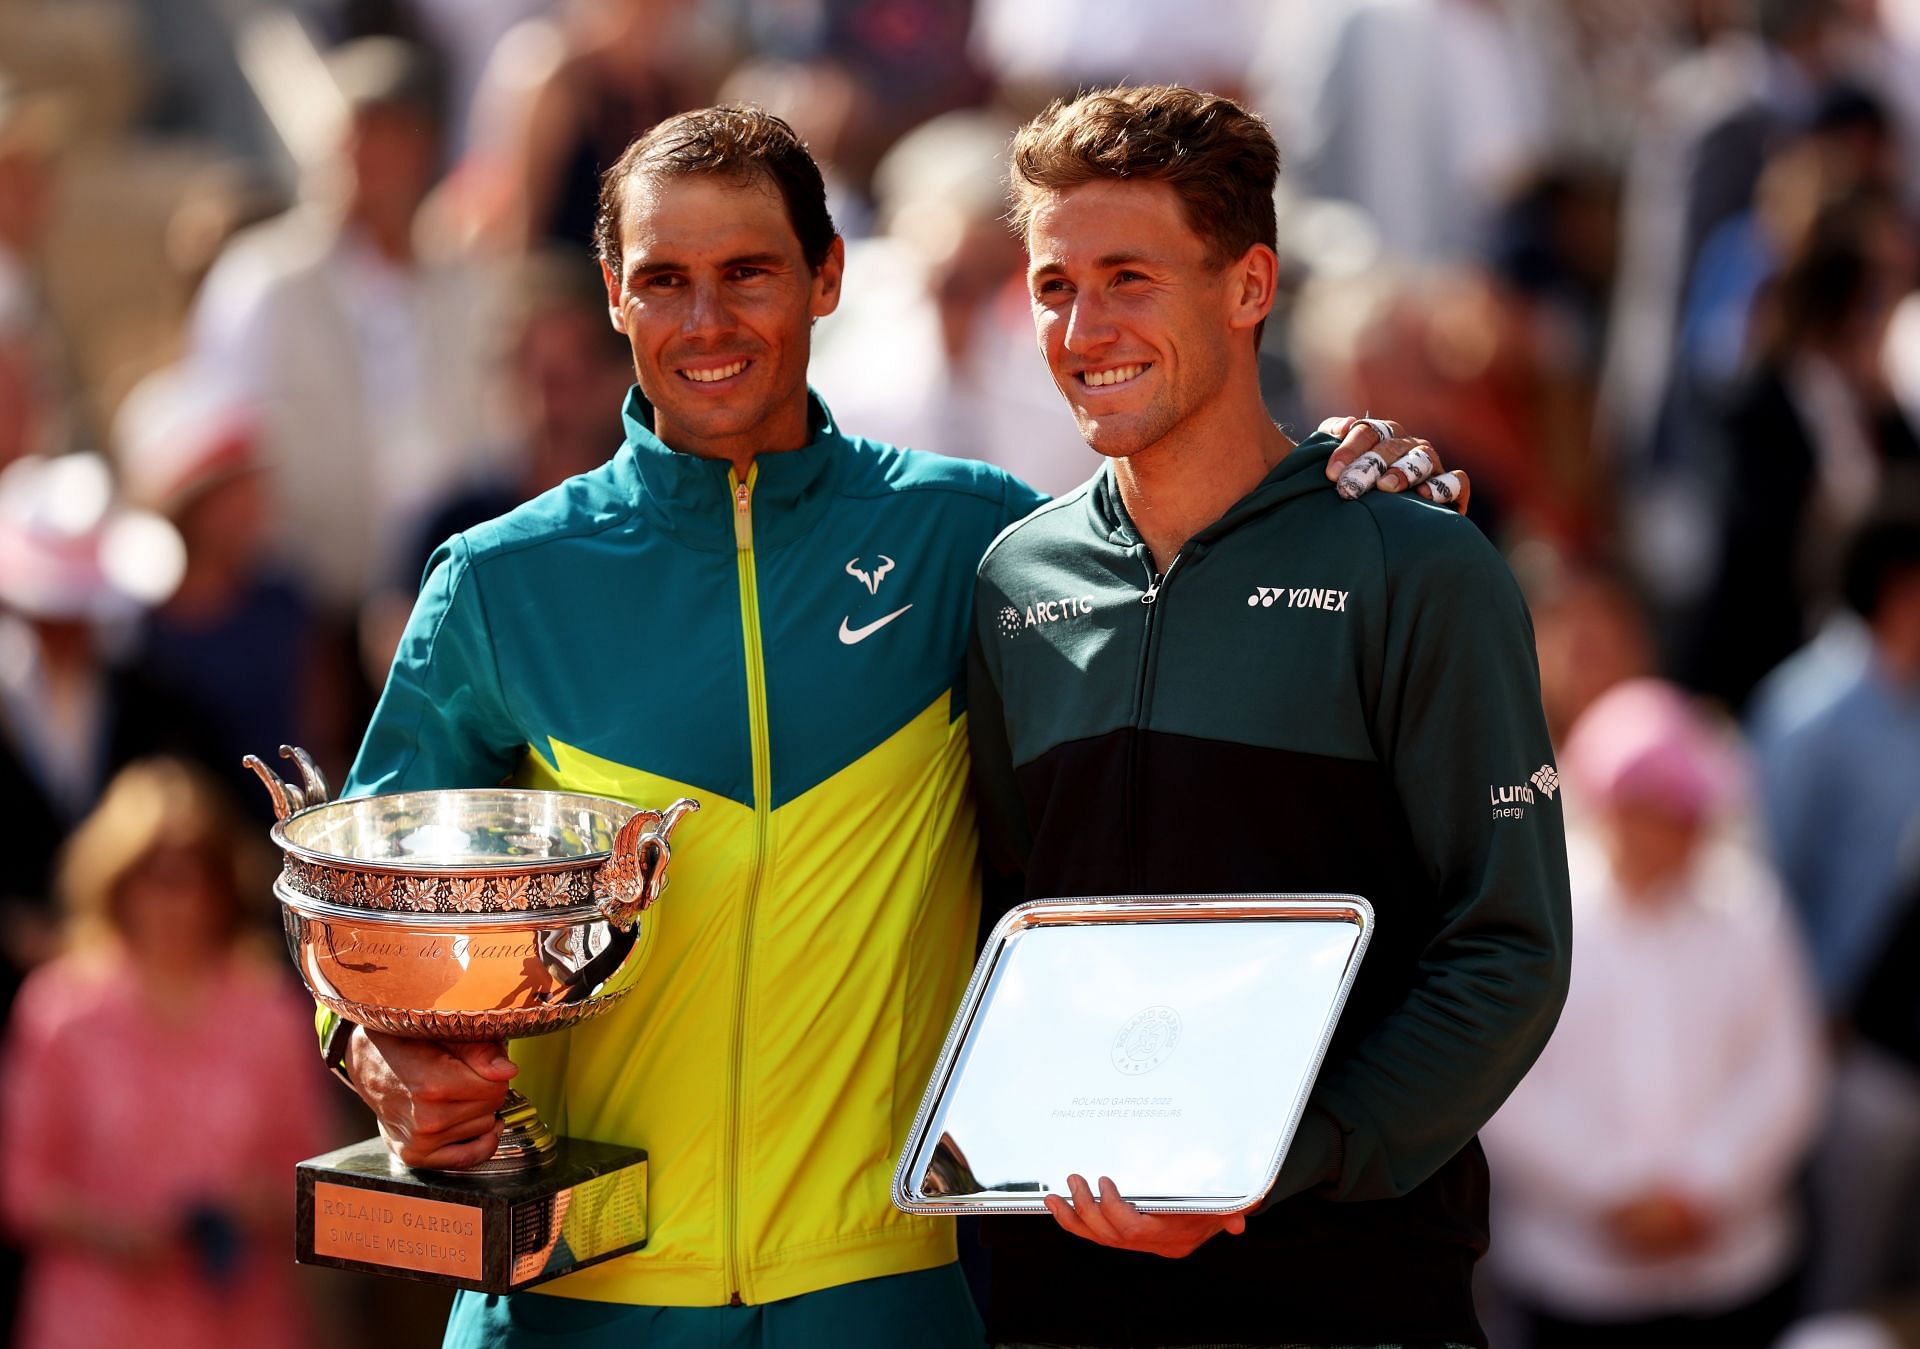 Rafael Nadal [left] &amp; Casper Ruud [right] with their respective 2022 French Open trophies.